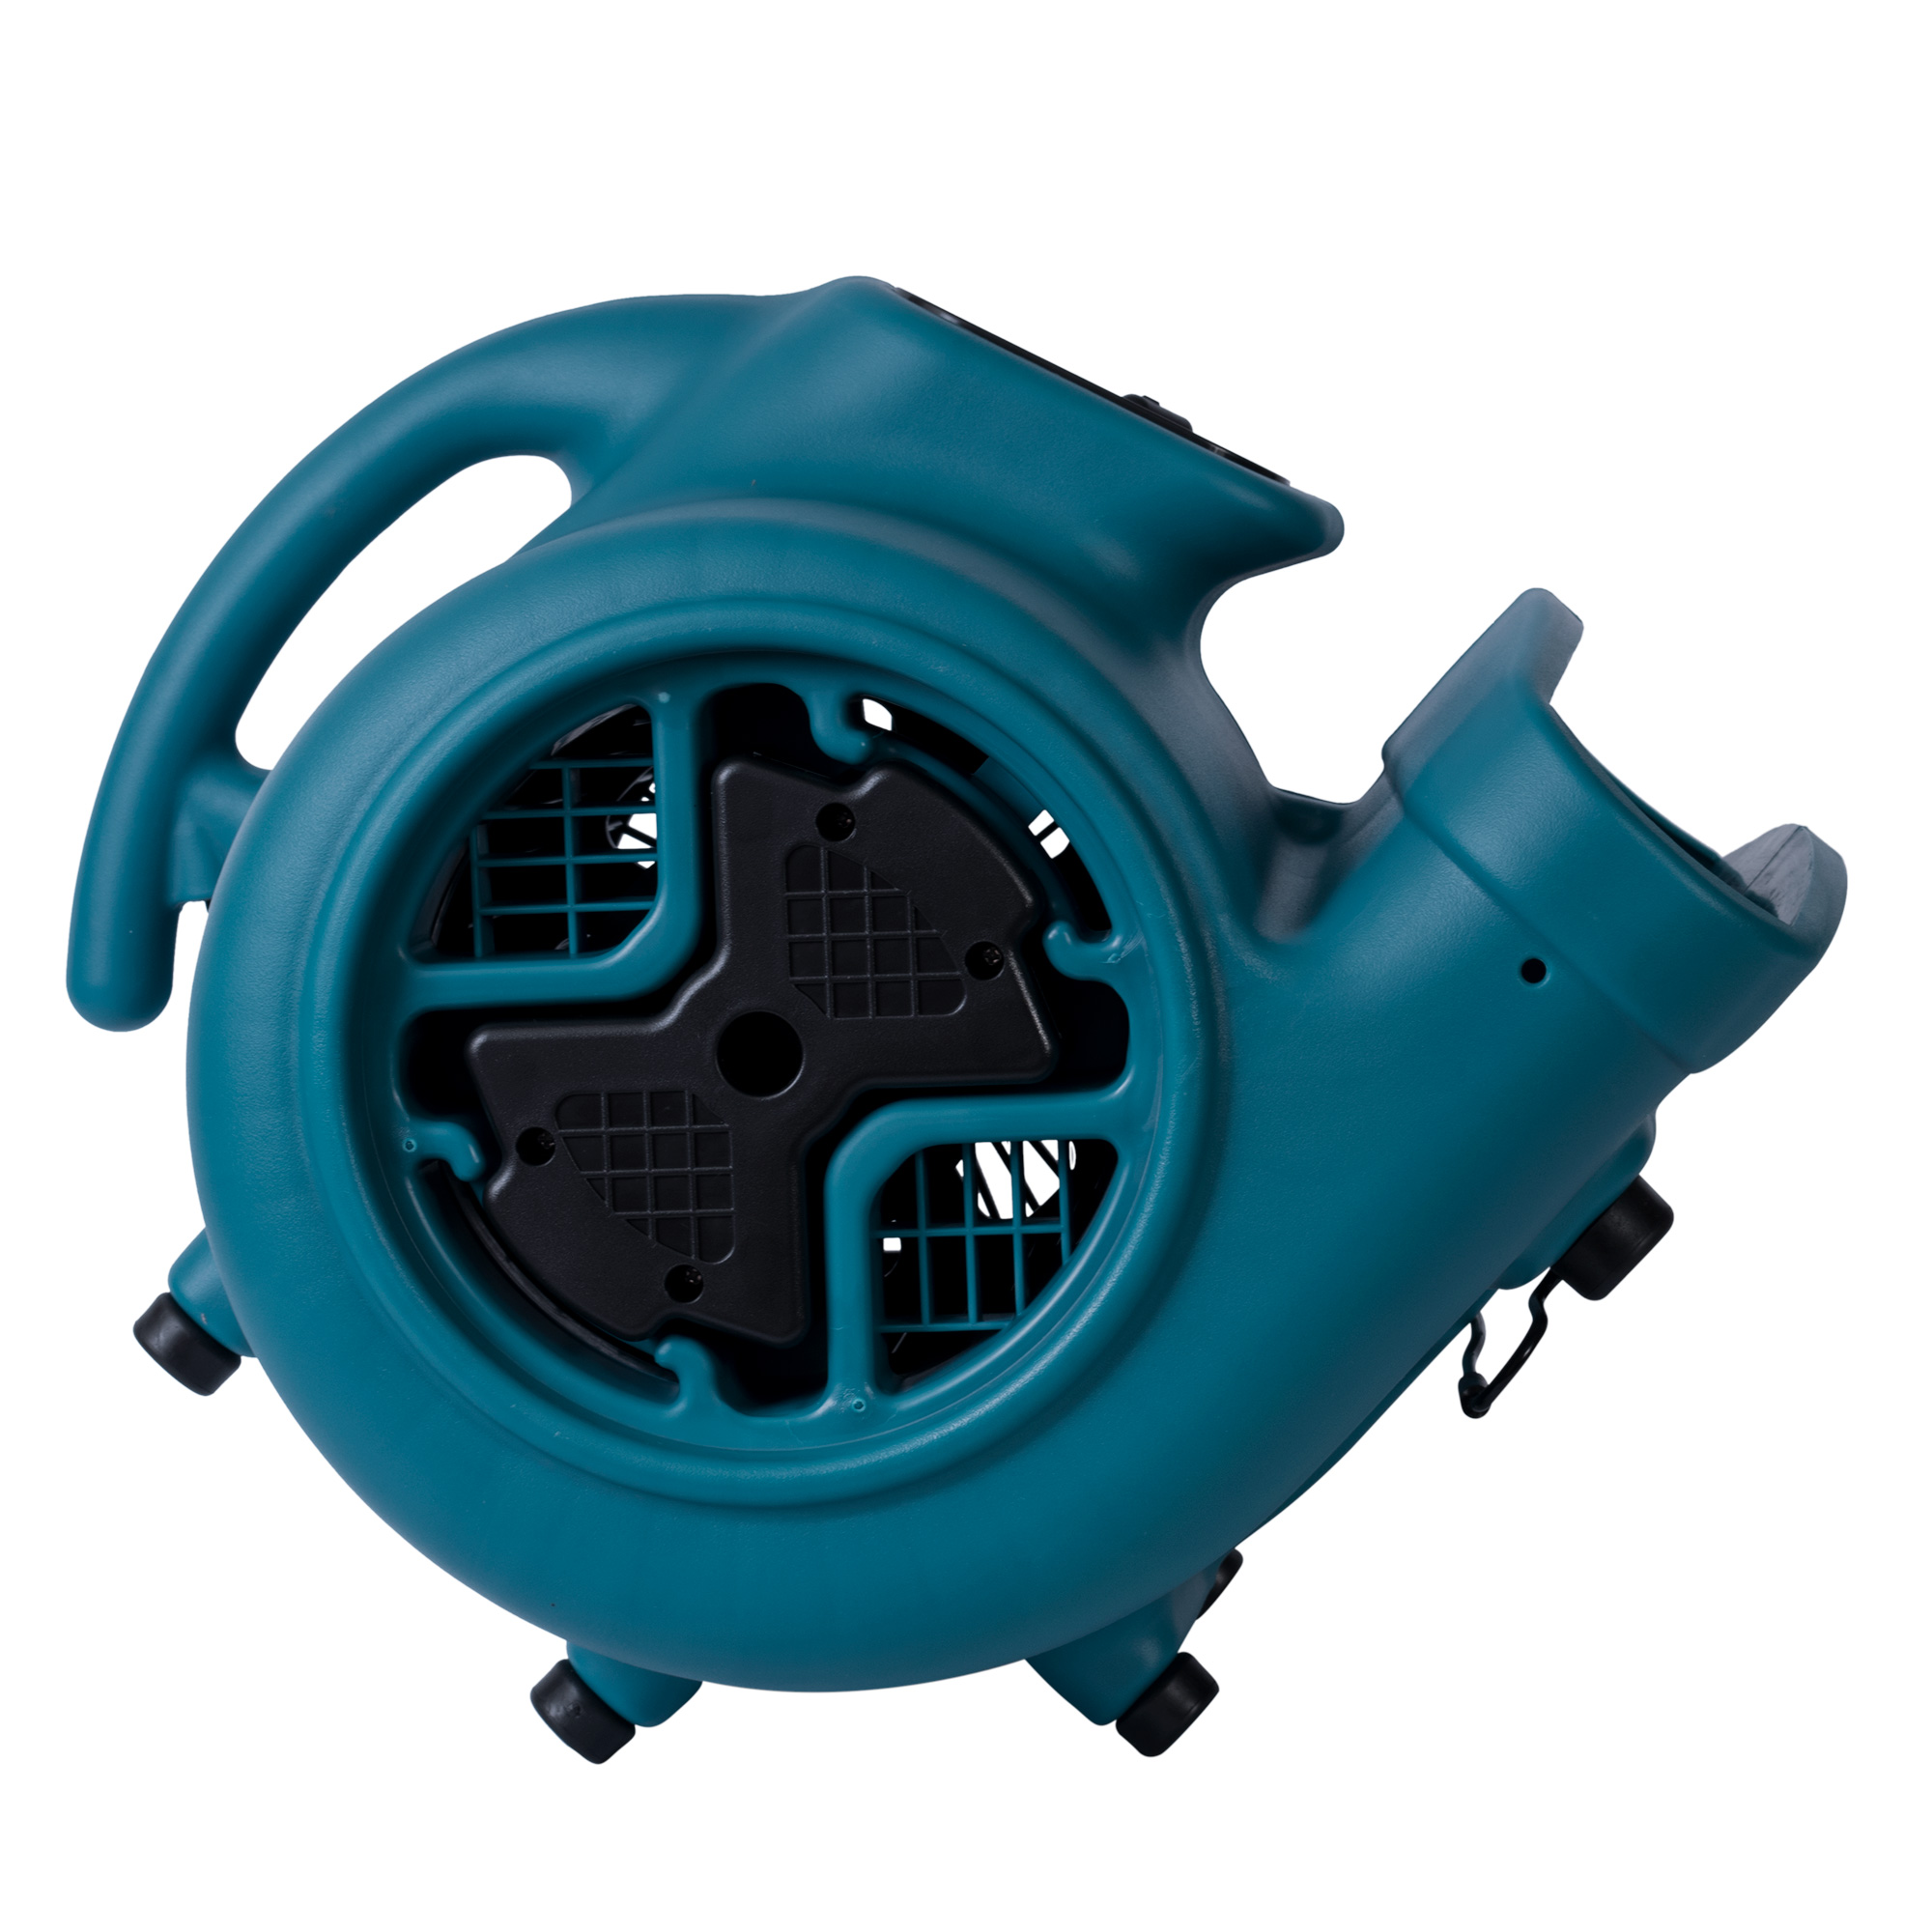 Air Mover - Carpet Dryer (Variable speed fan)